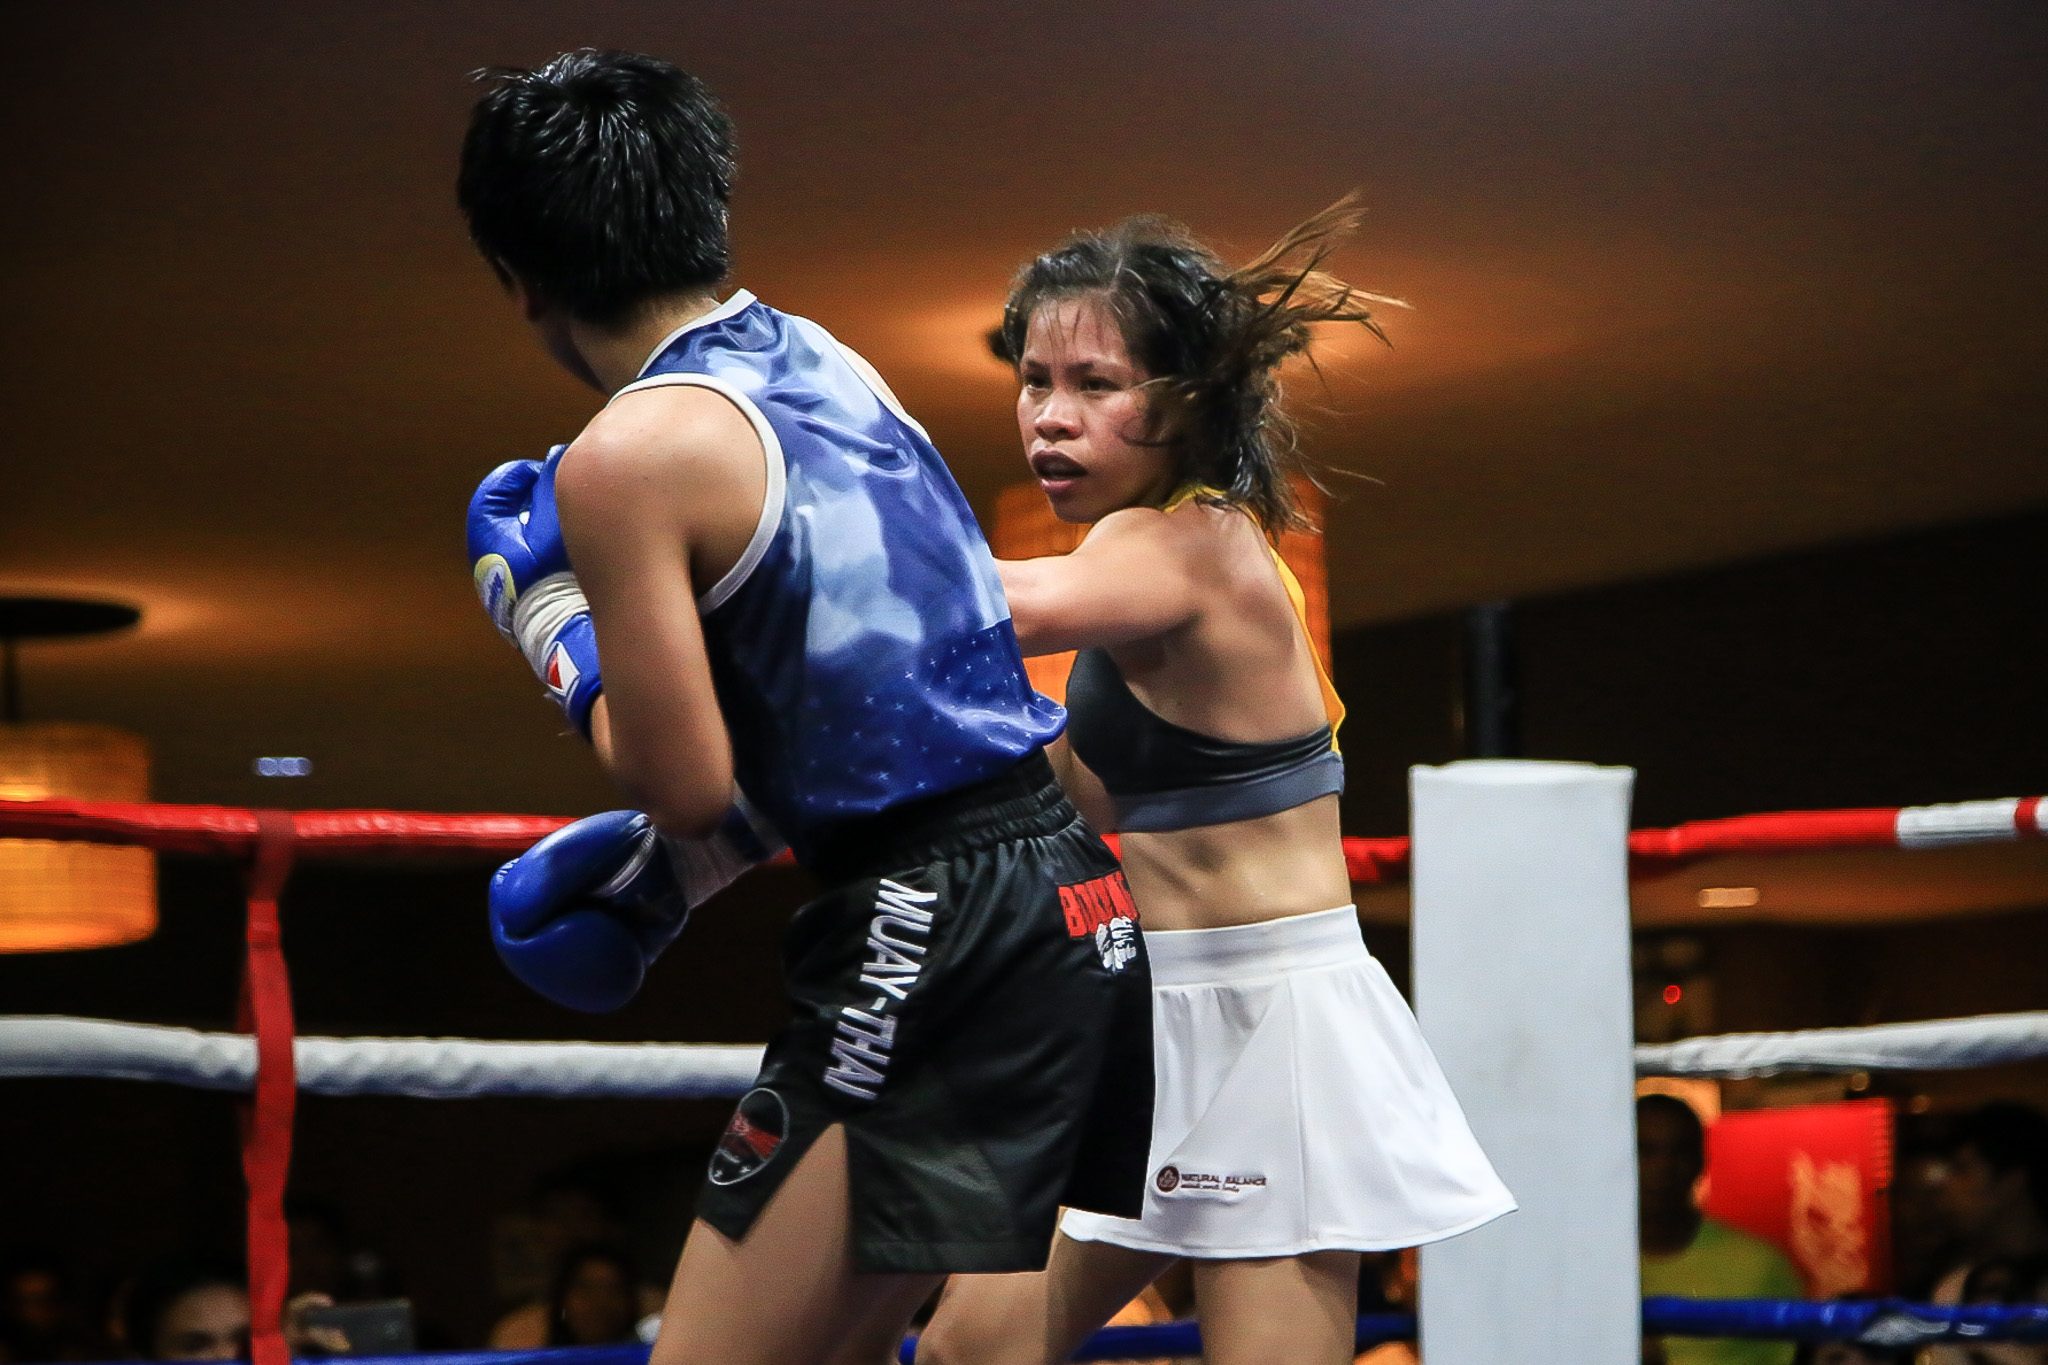 Abaniel loses decision to IBF champ Zong in Macau, but feels she should have won